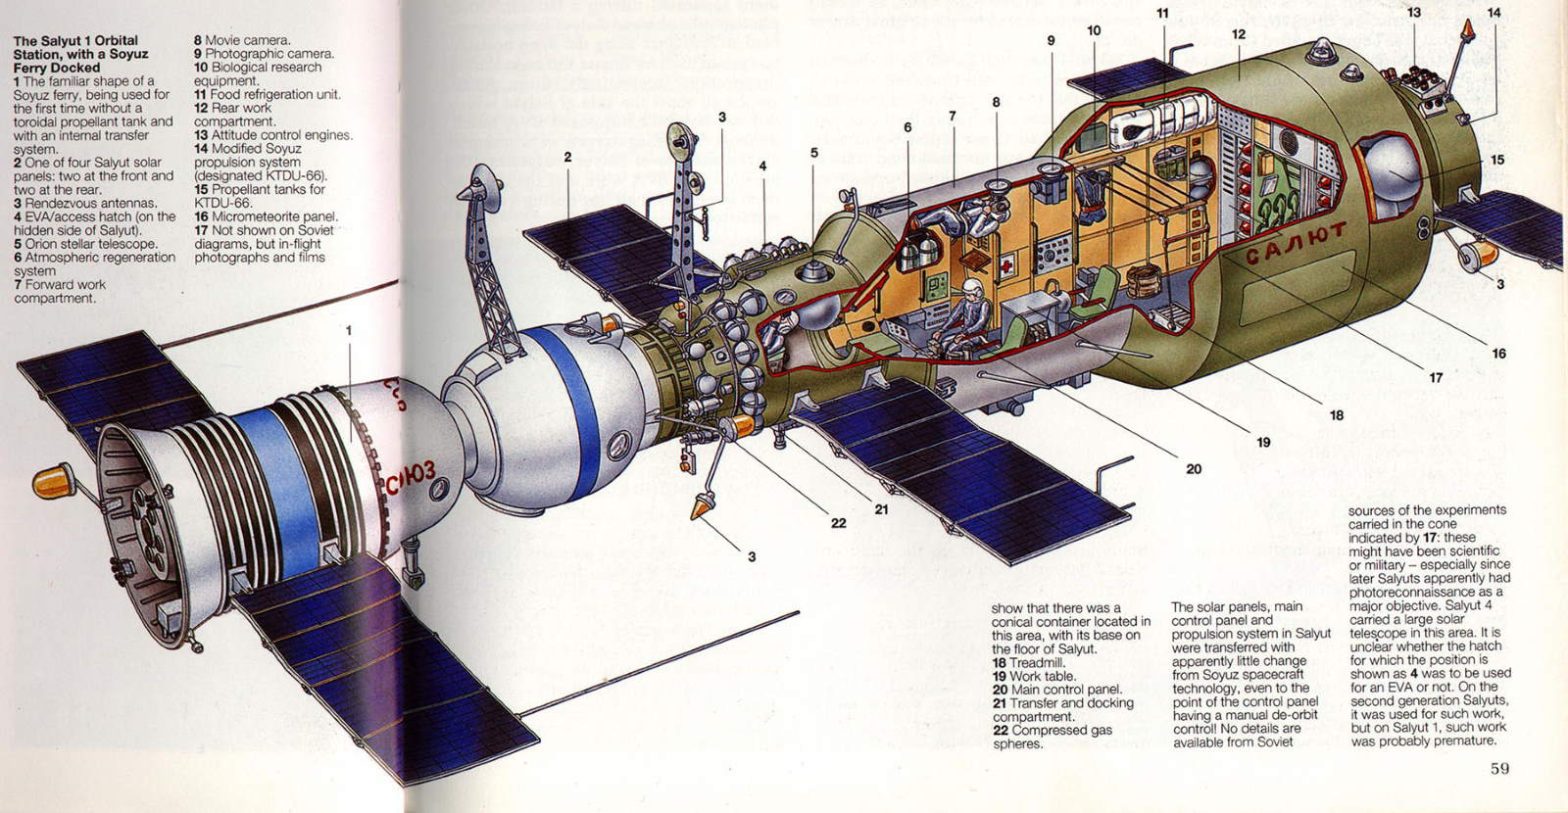 The First Space Station, Salyut 1